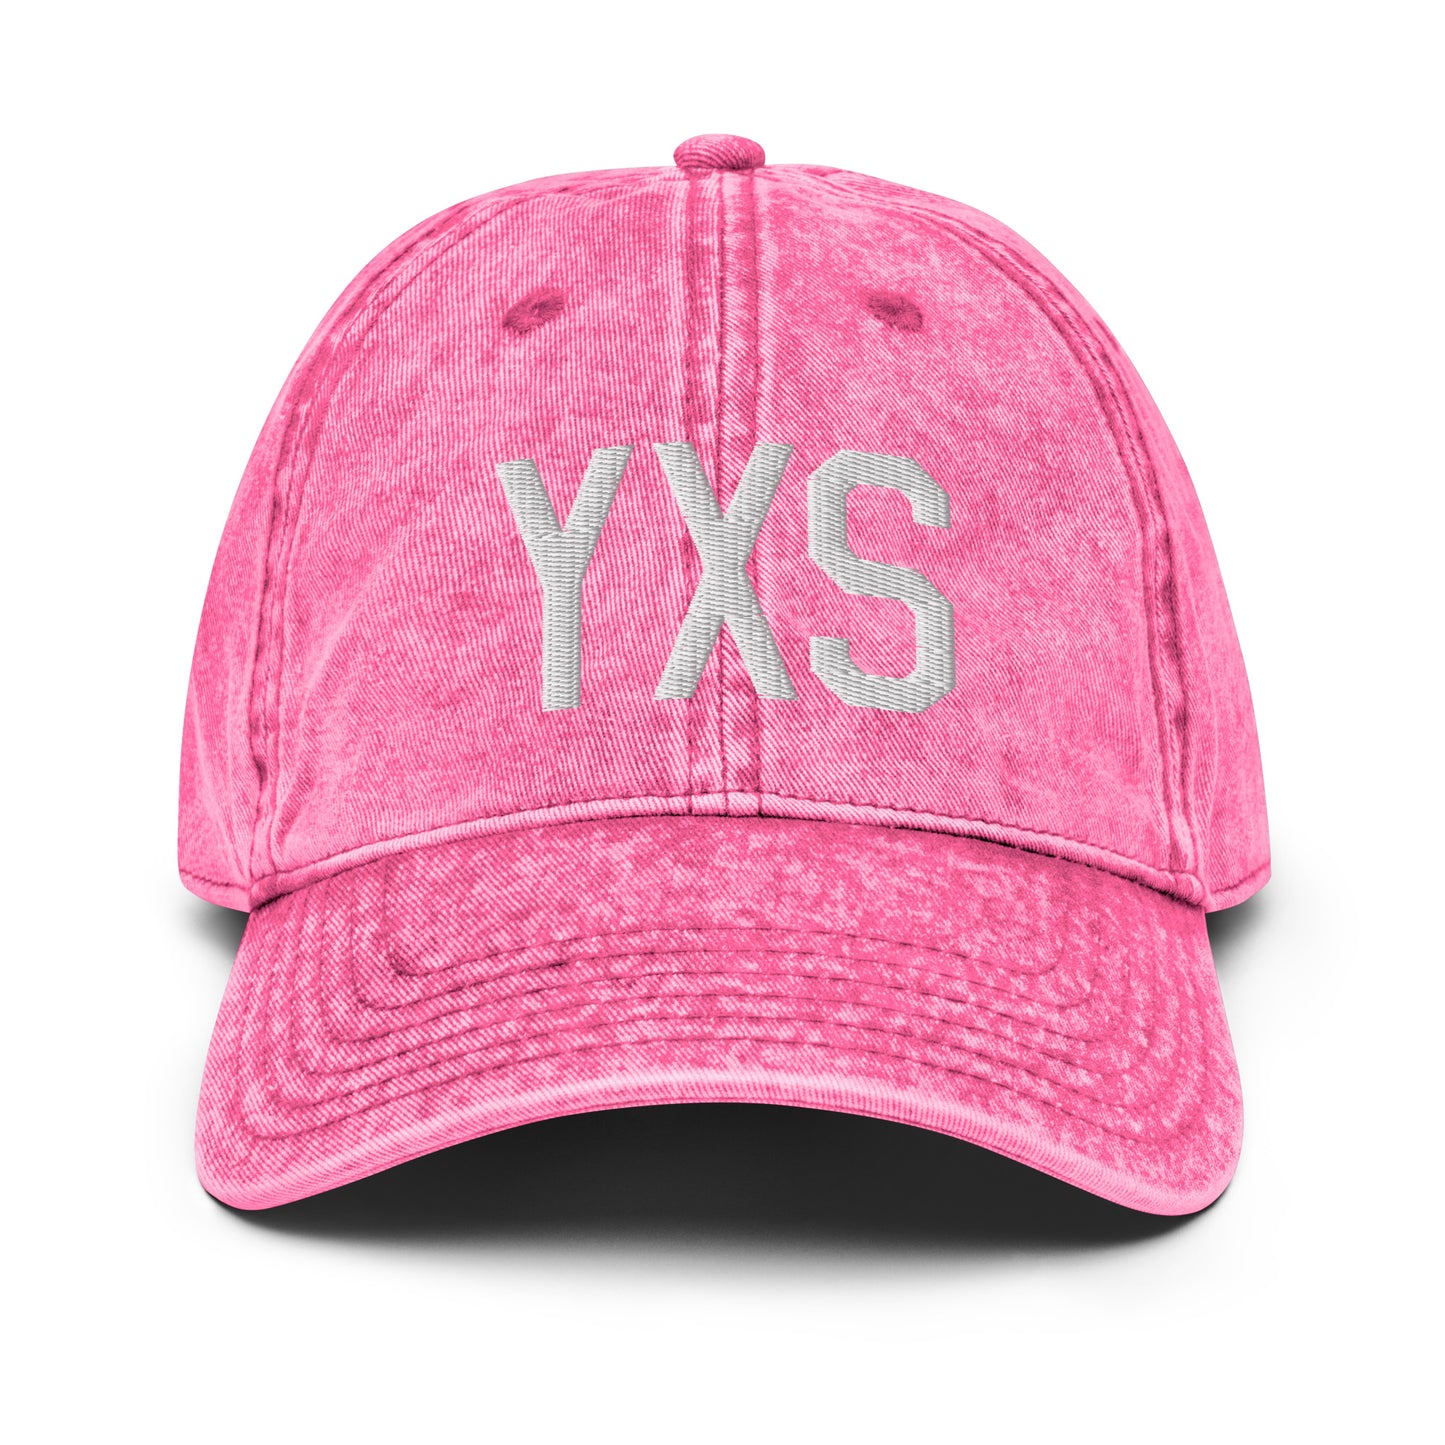 Airport Code Twill Cap - White • YXS Prince George • YHM Designs - Image 25